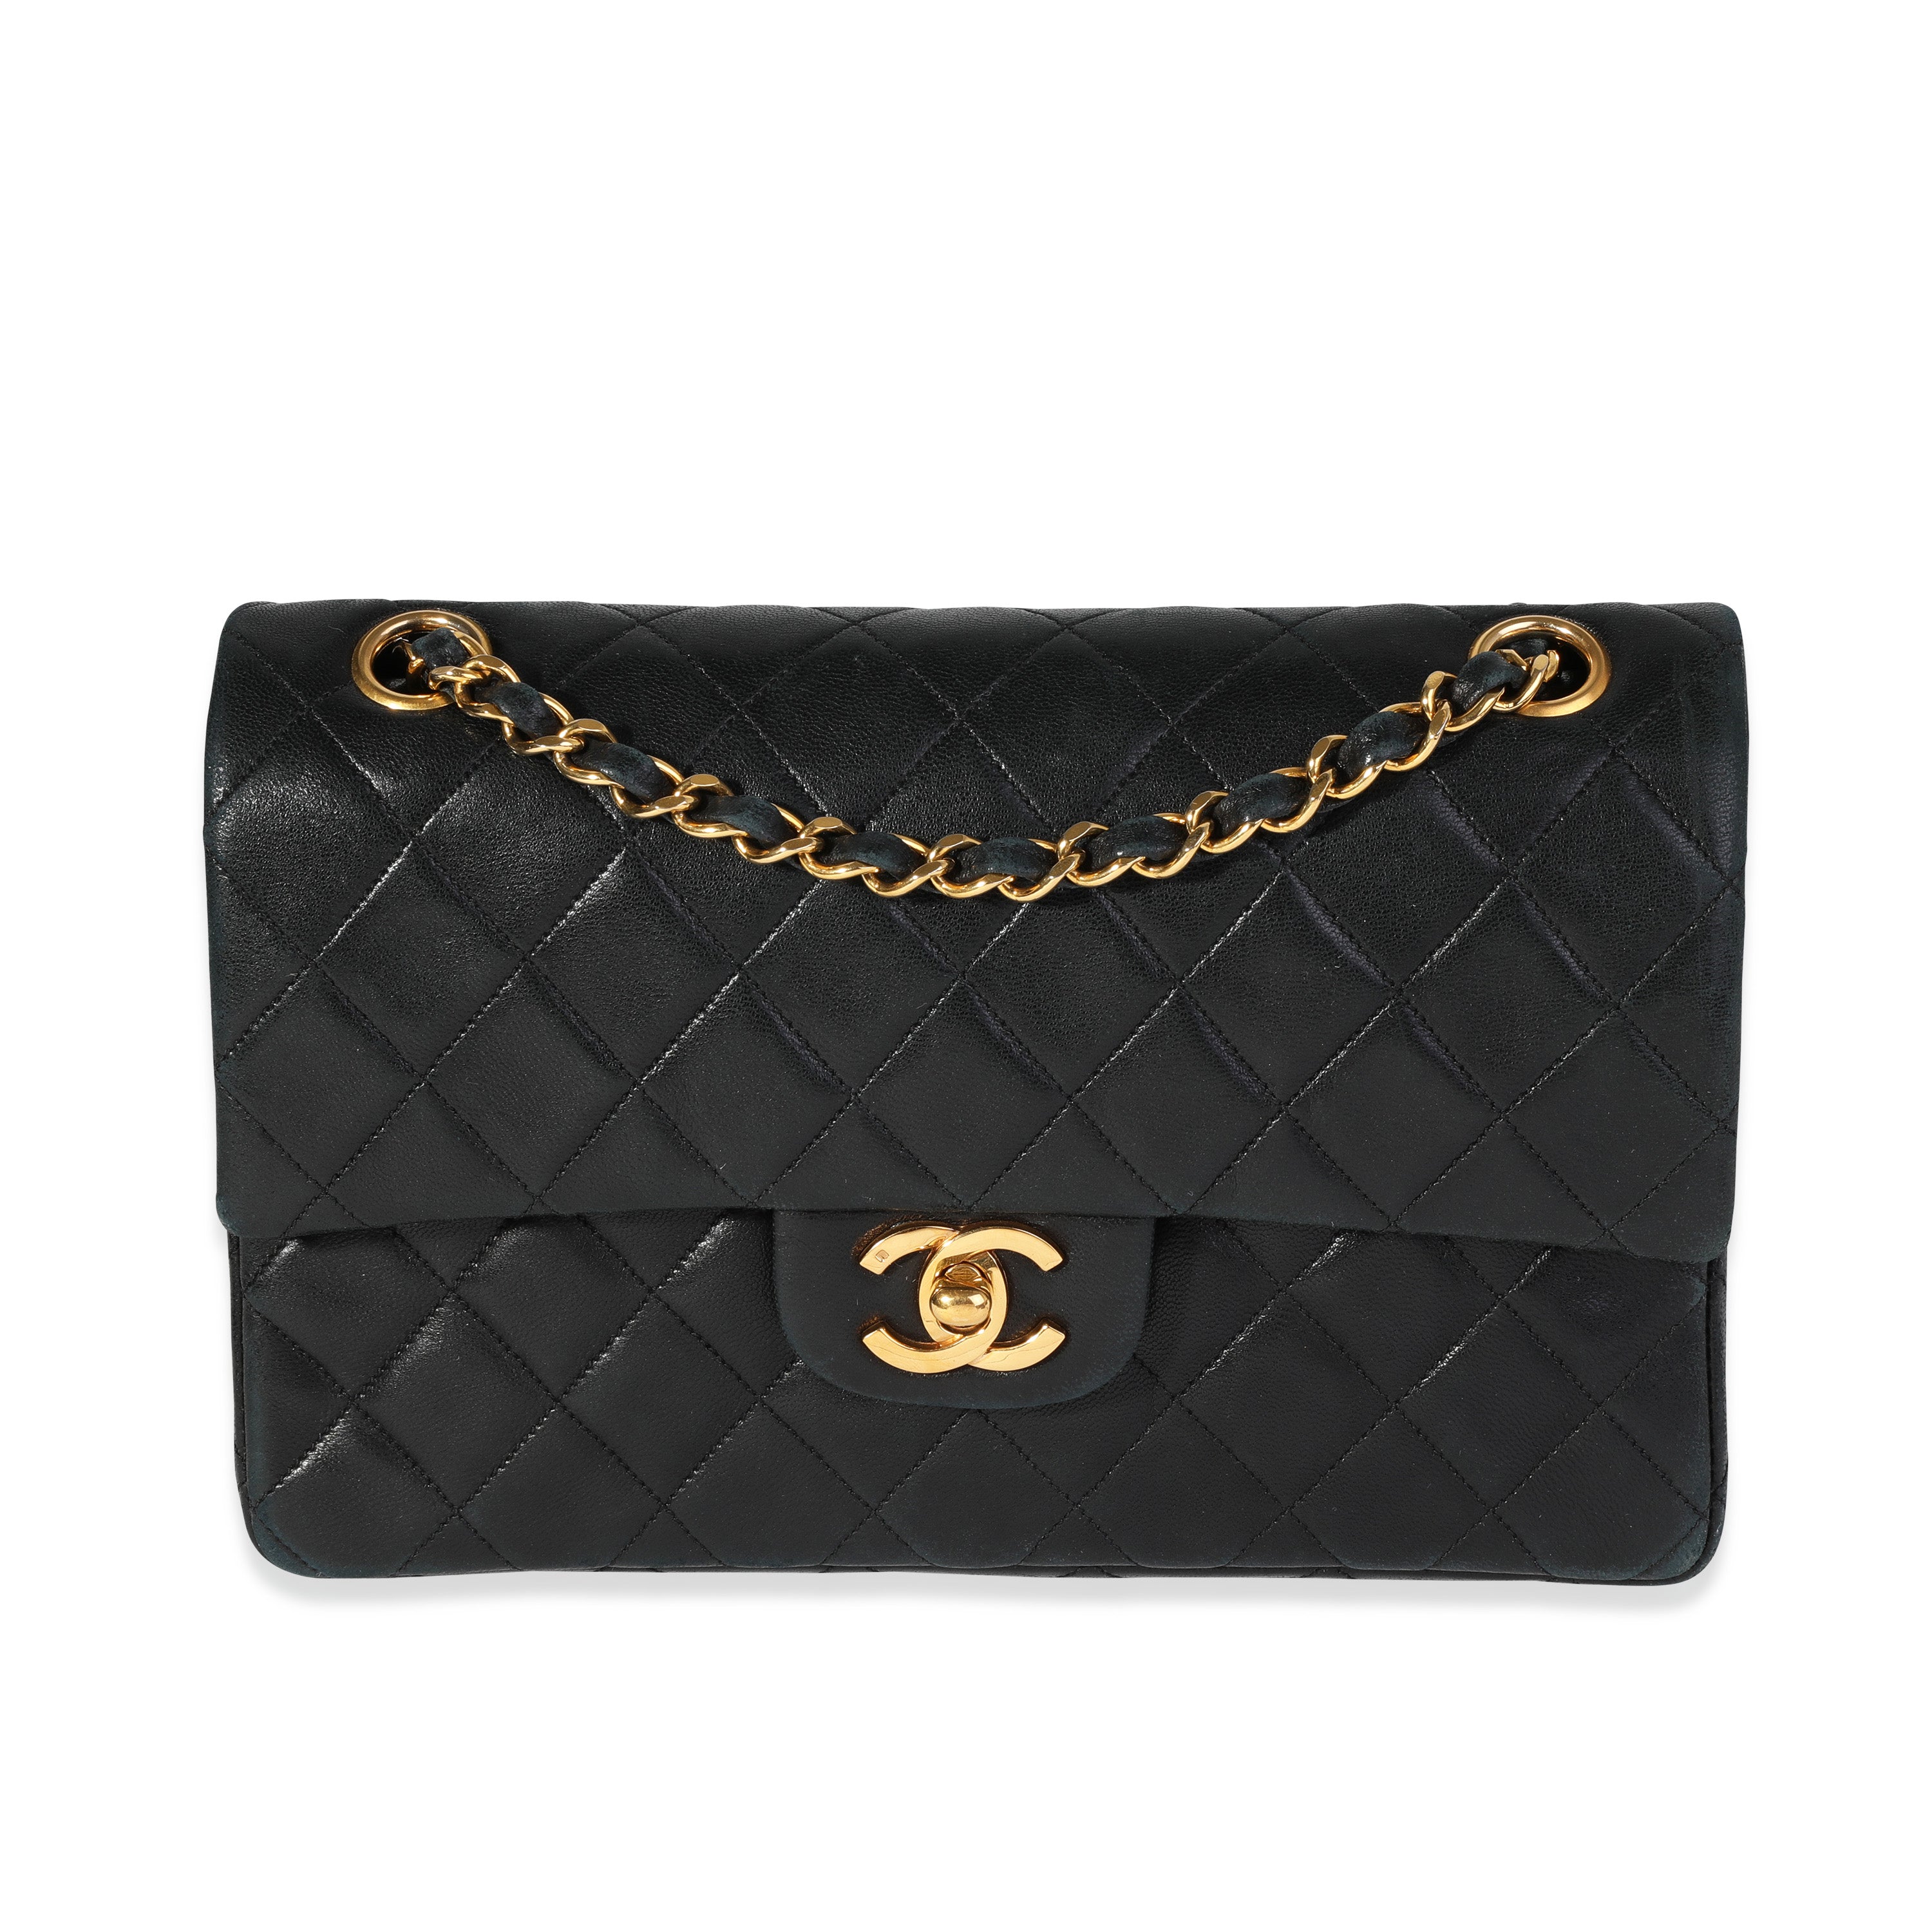 CHANEL Vintage 90s Black Lambskin Leather Classic Flap Quilted Mini Shoulder  Bag